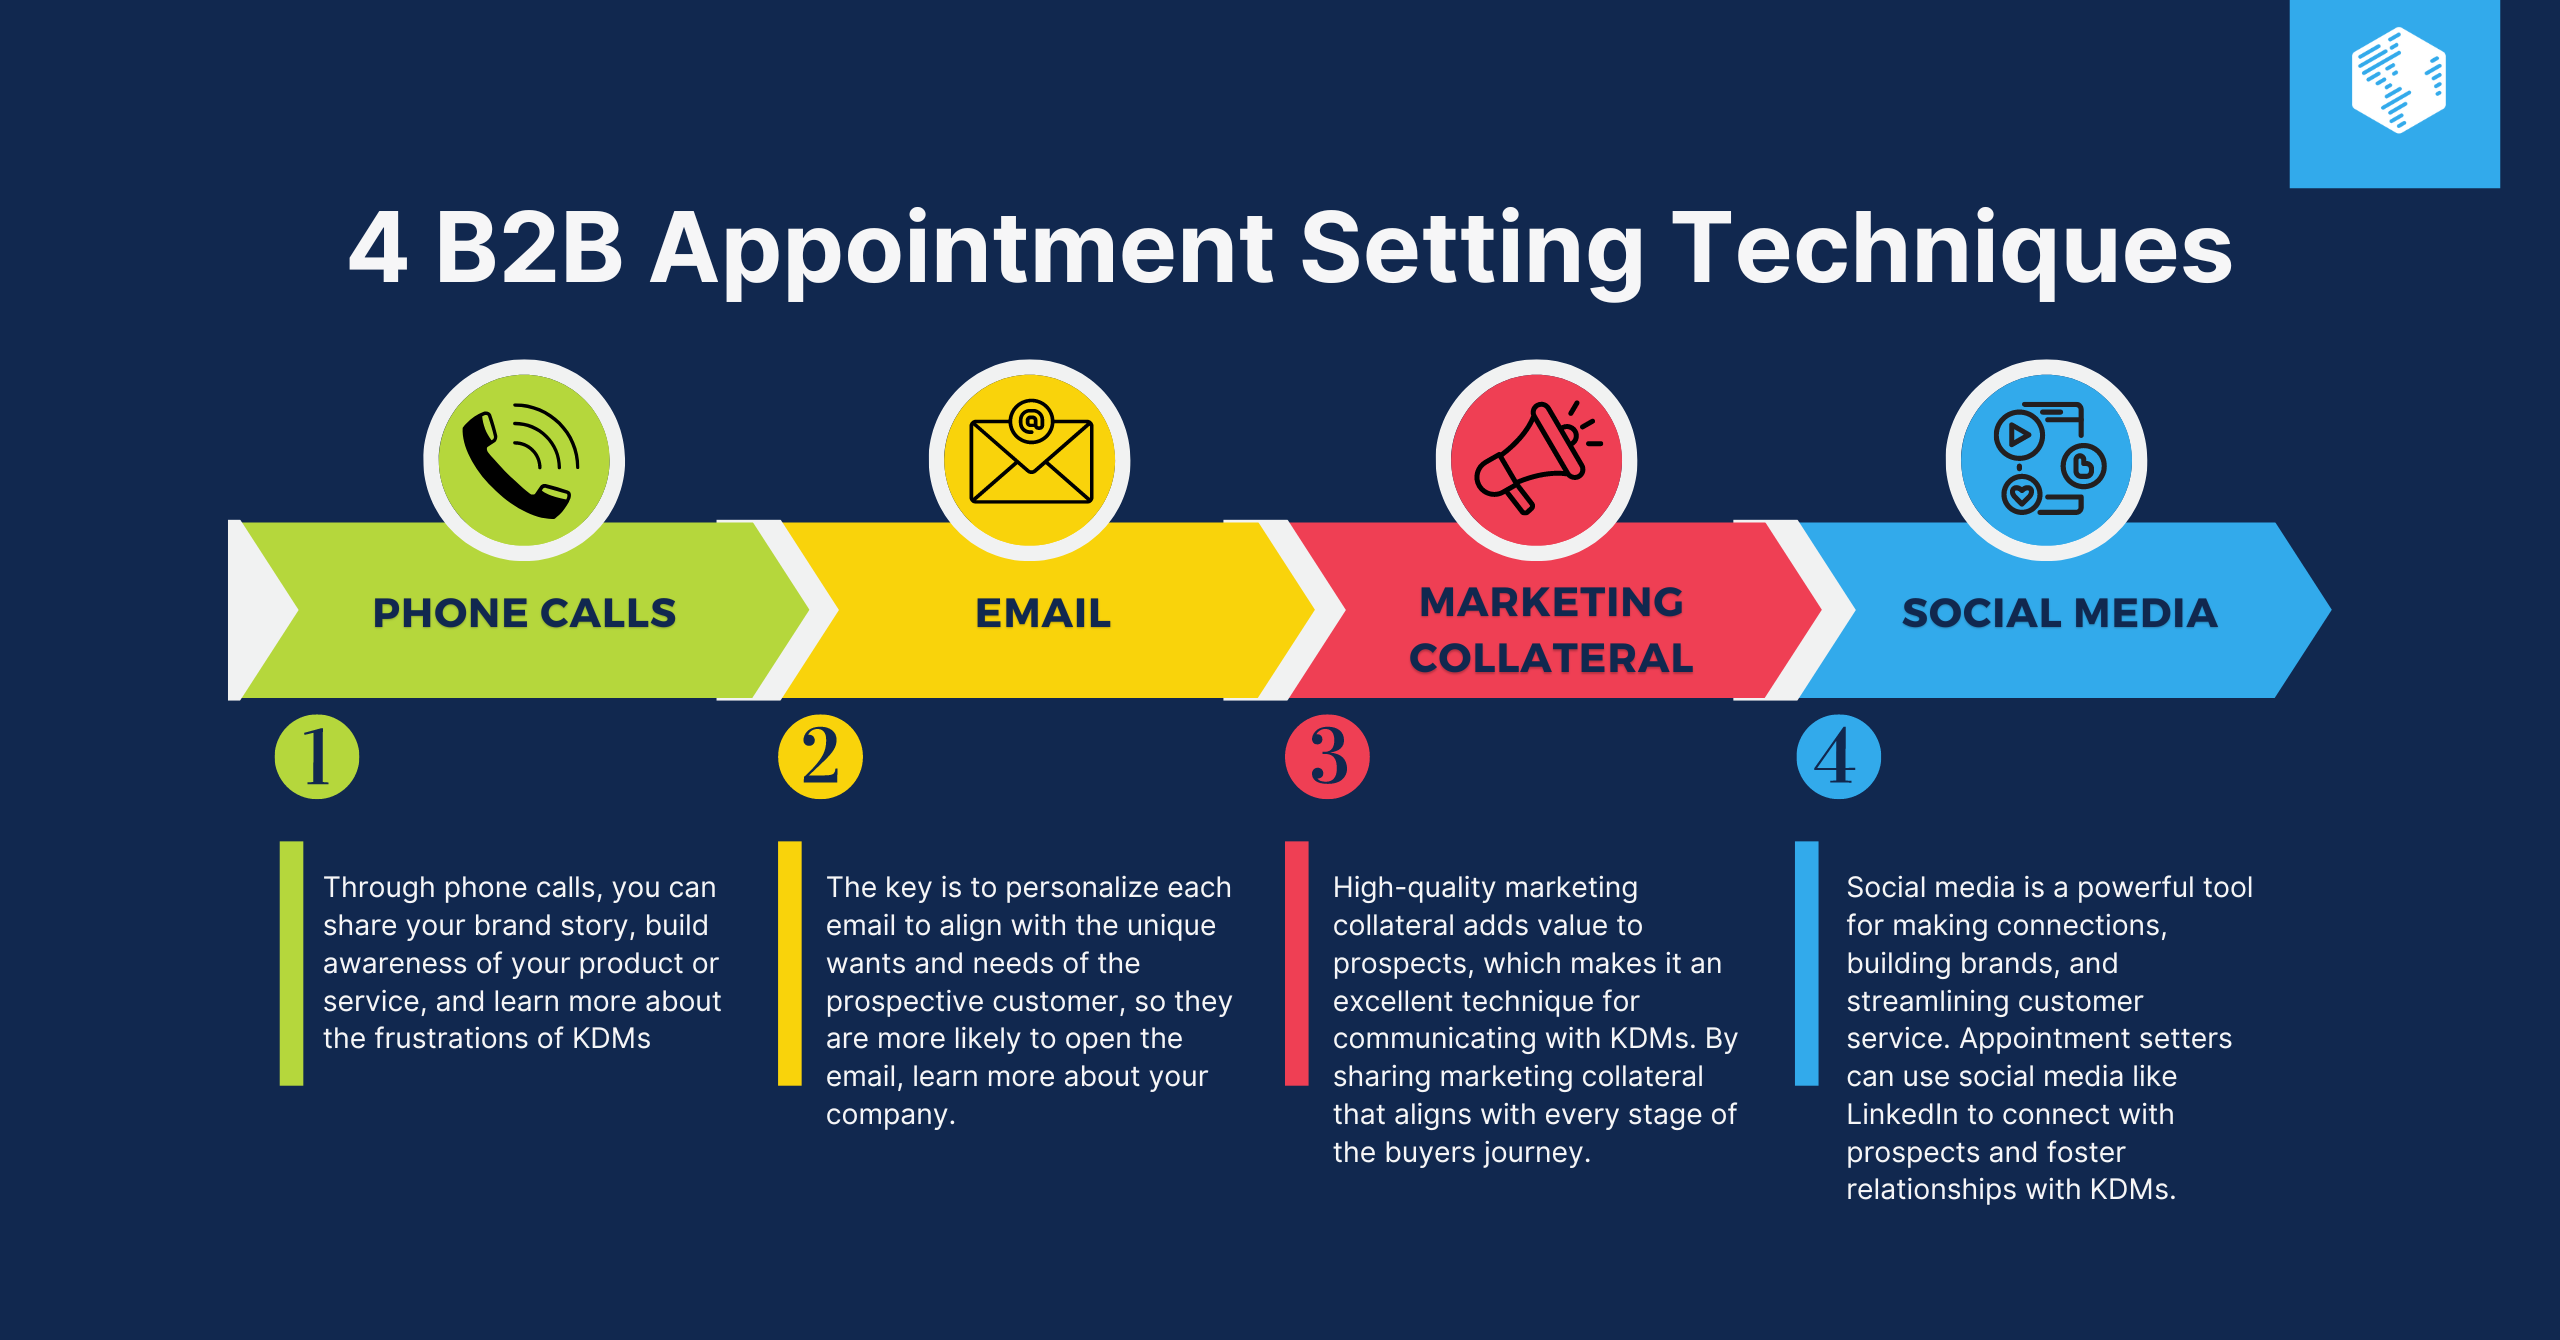 B2B Appointment Setting Techniques